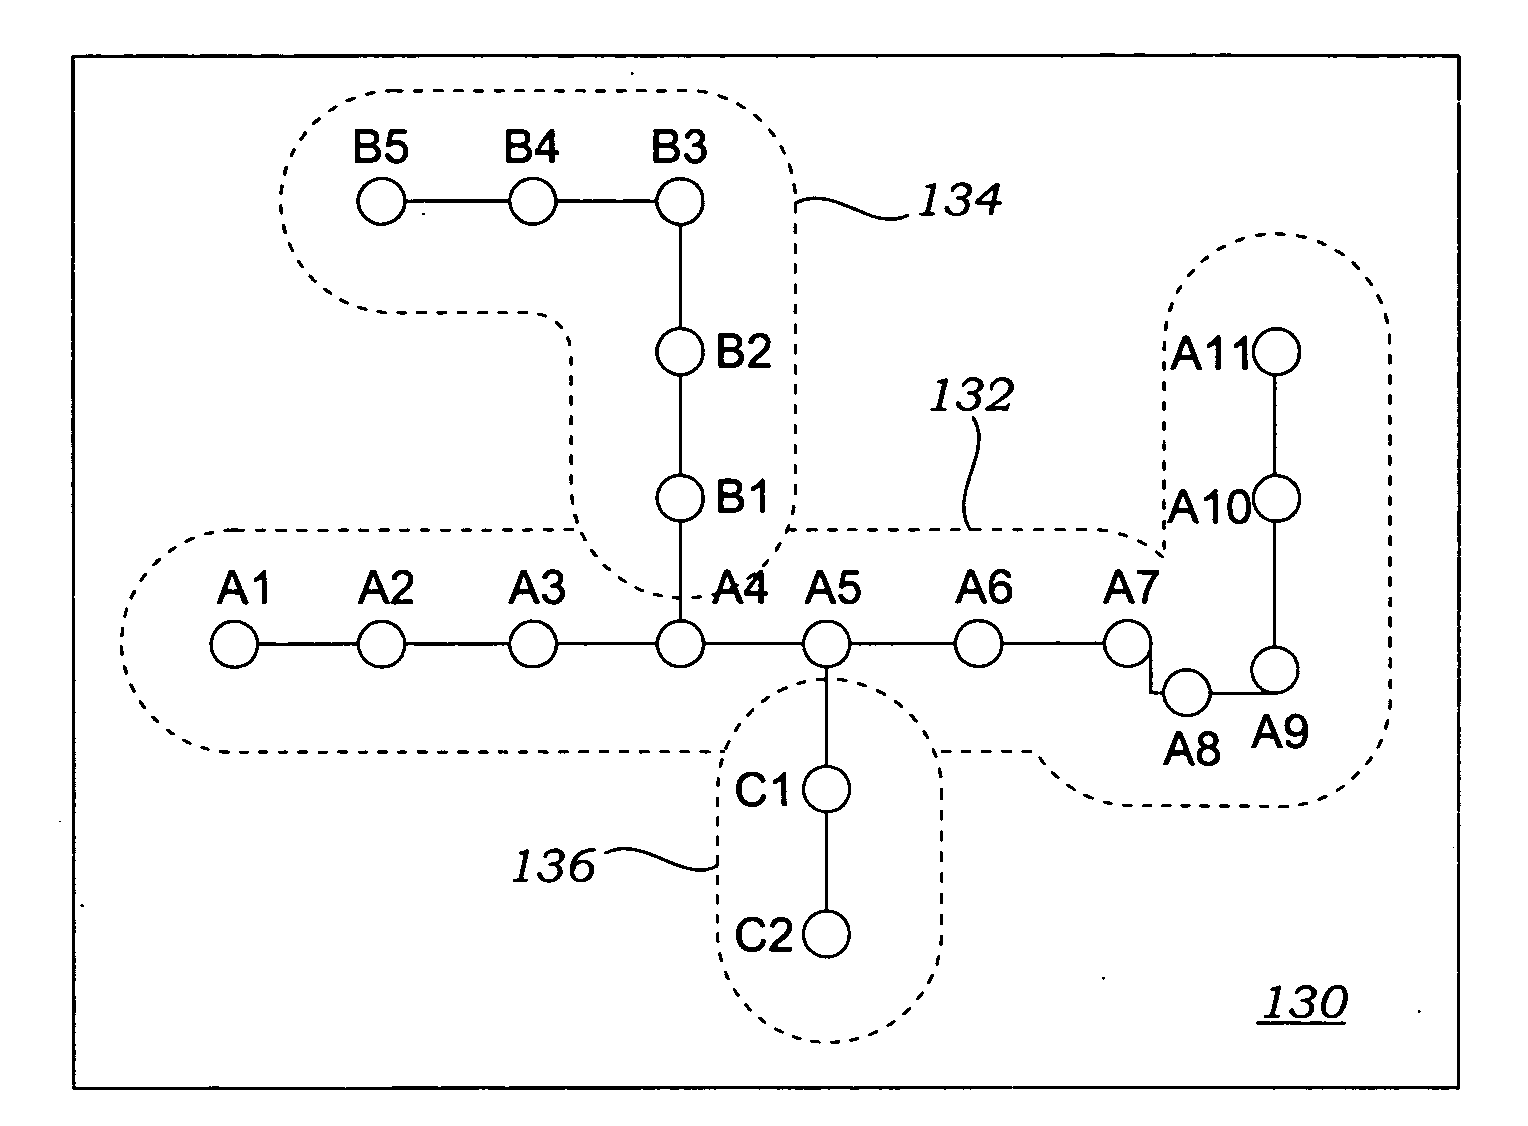 Methods for simulating movement of a computer user through a remote environment